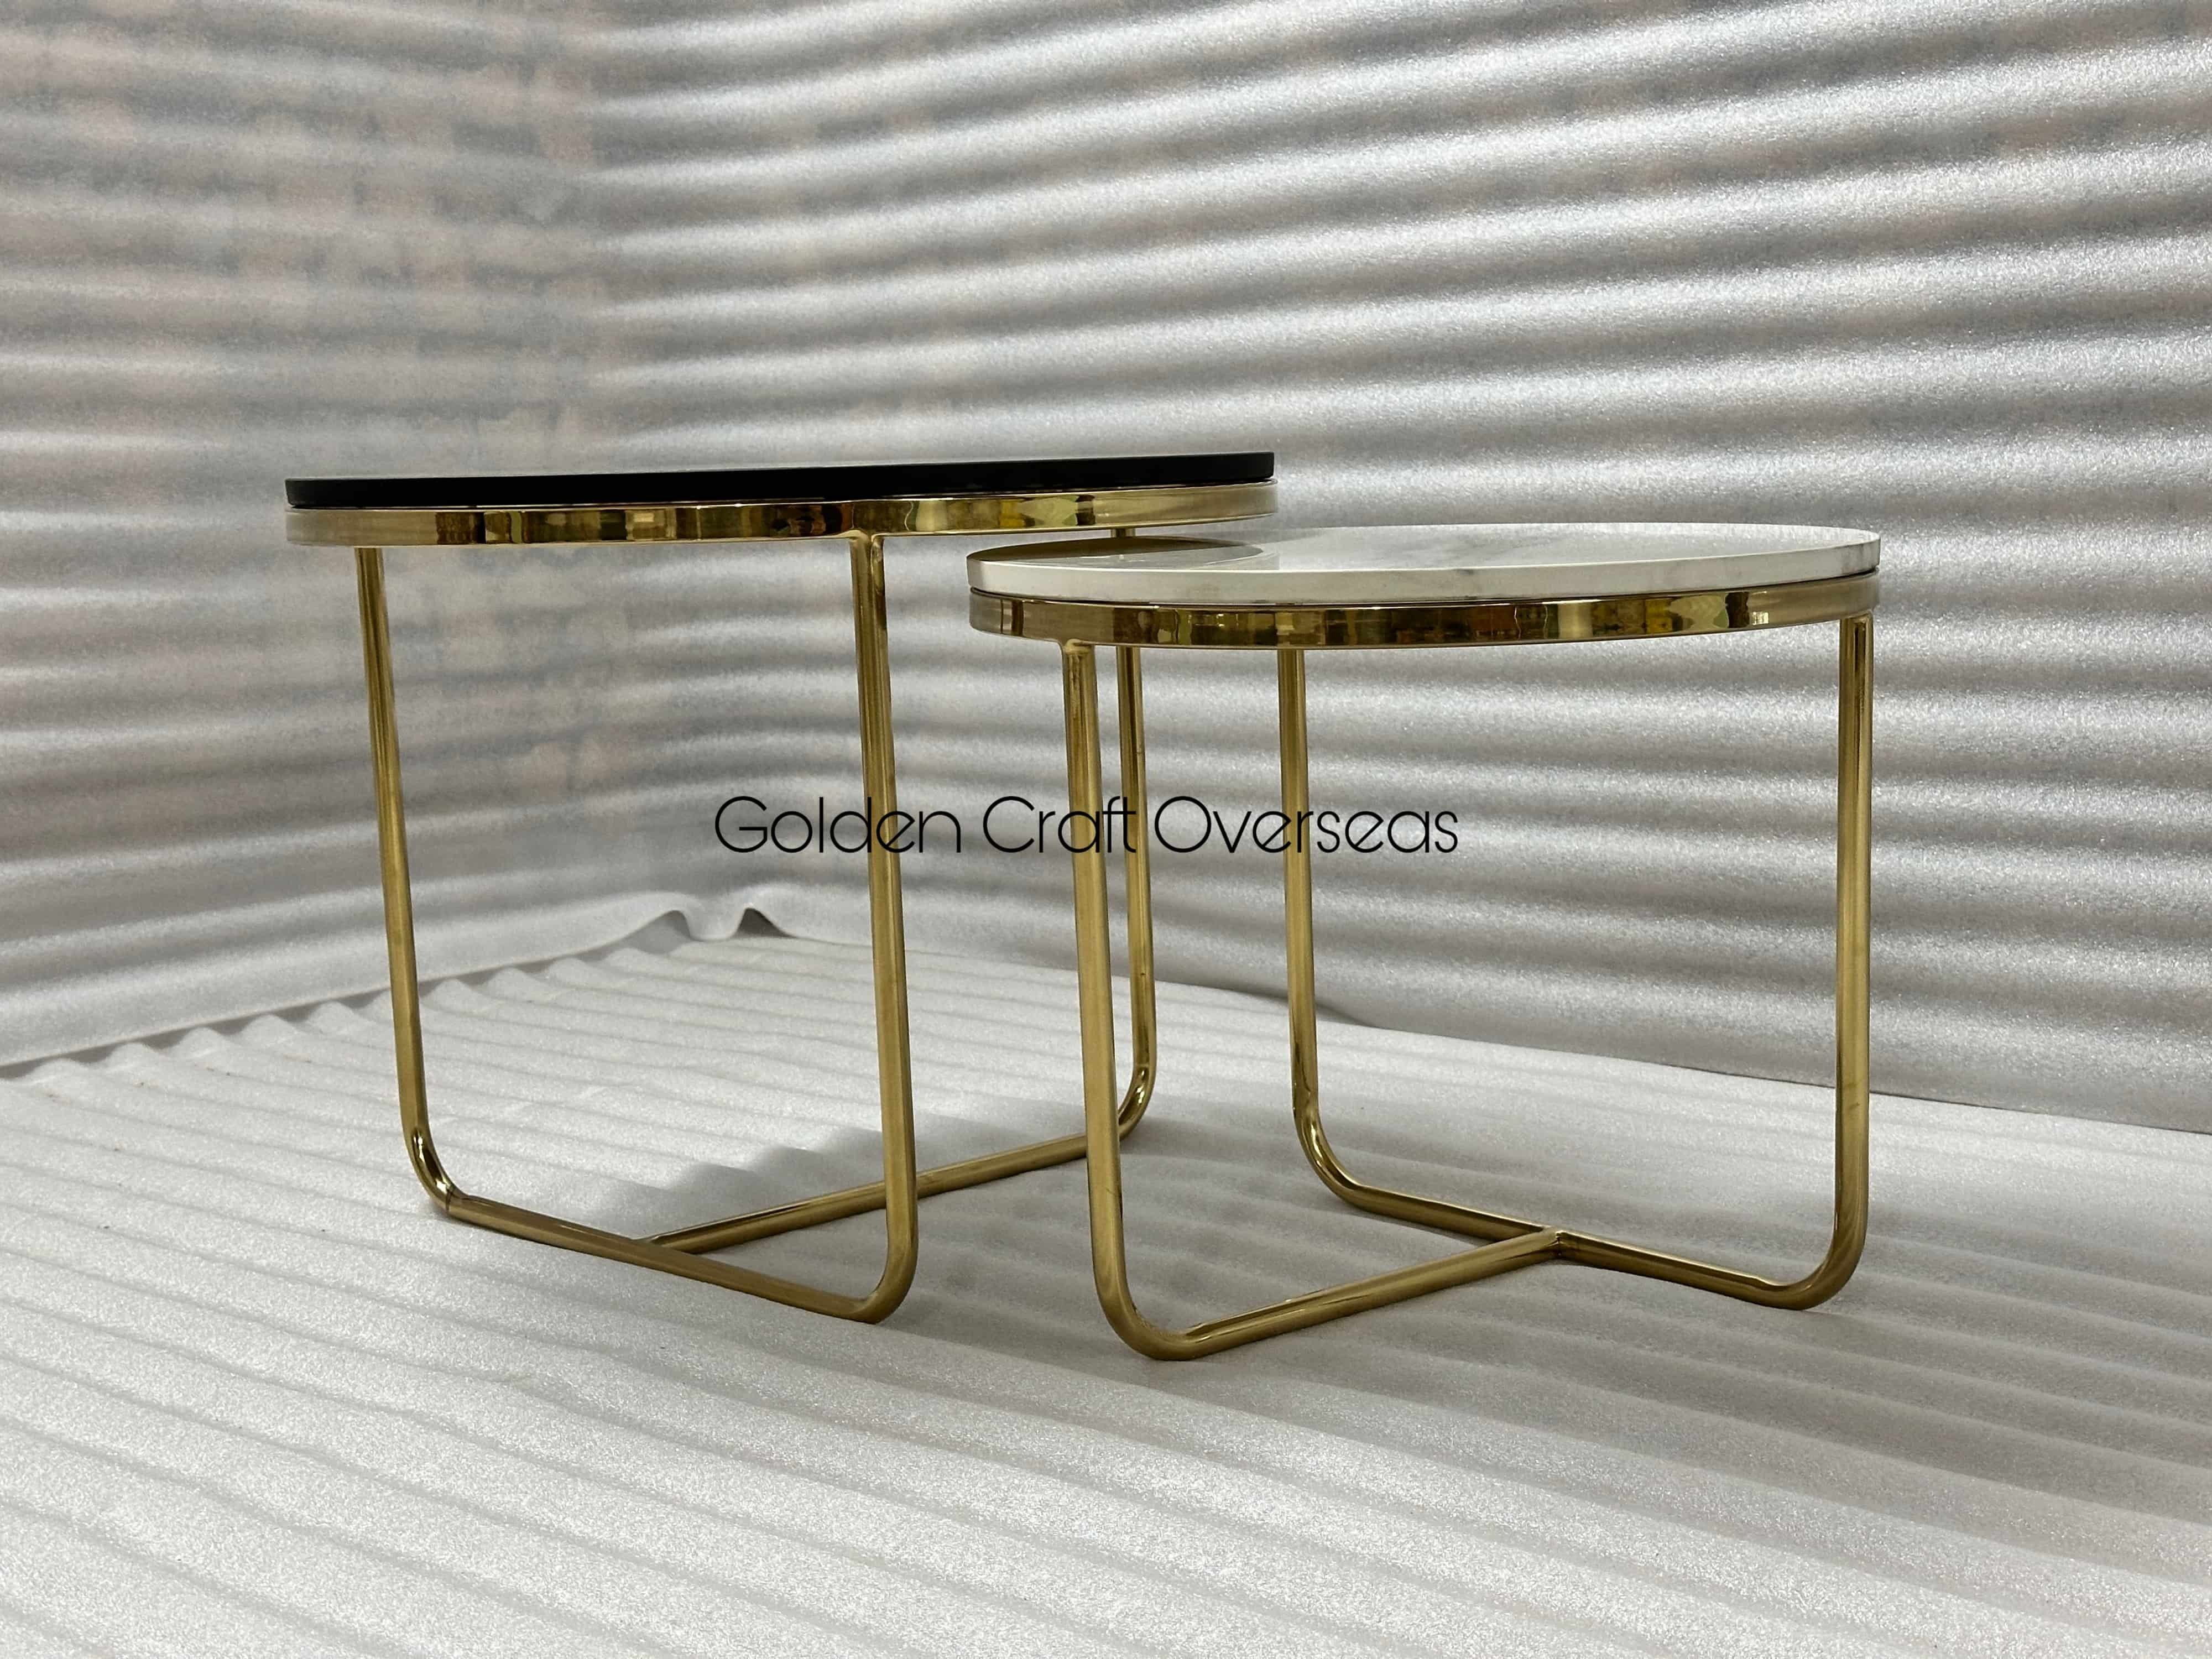 Gold PVD Coated Nesting Table Set of 2 In Stainless Steel 304 grade with black and white marble top